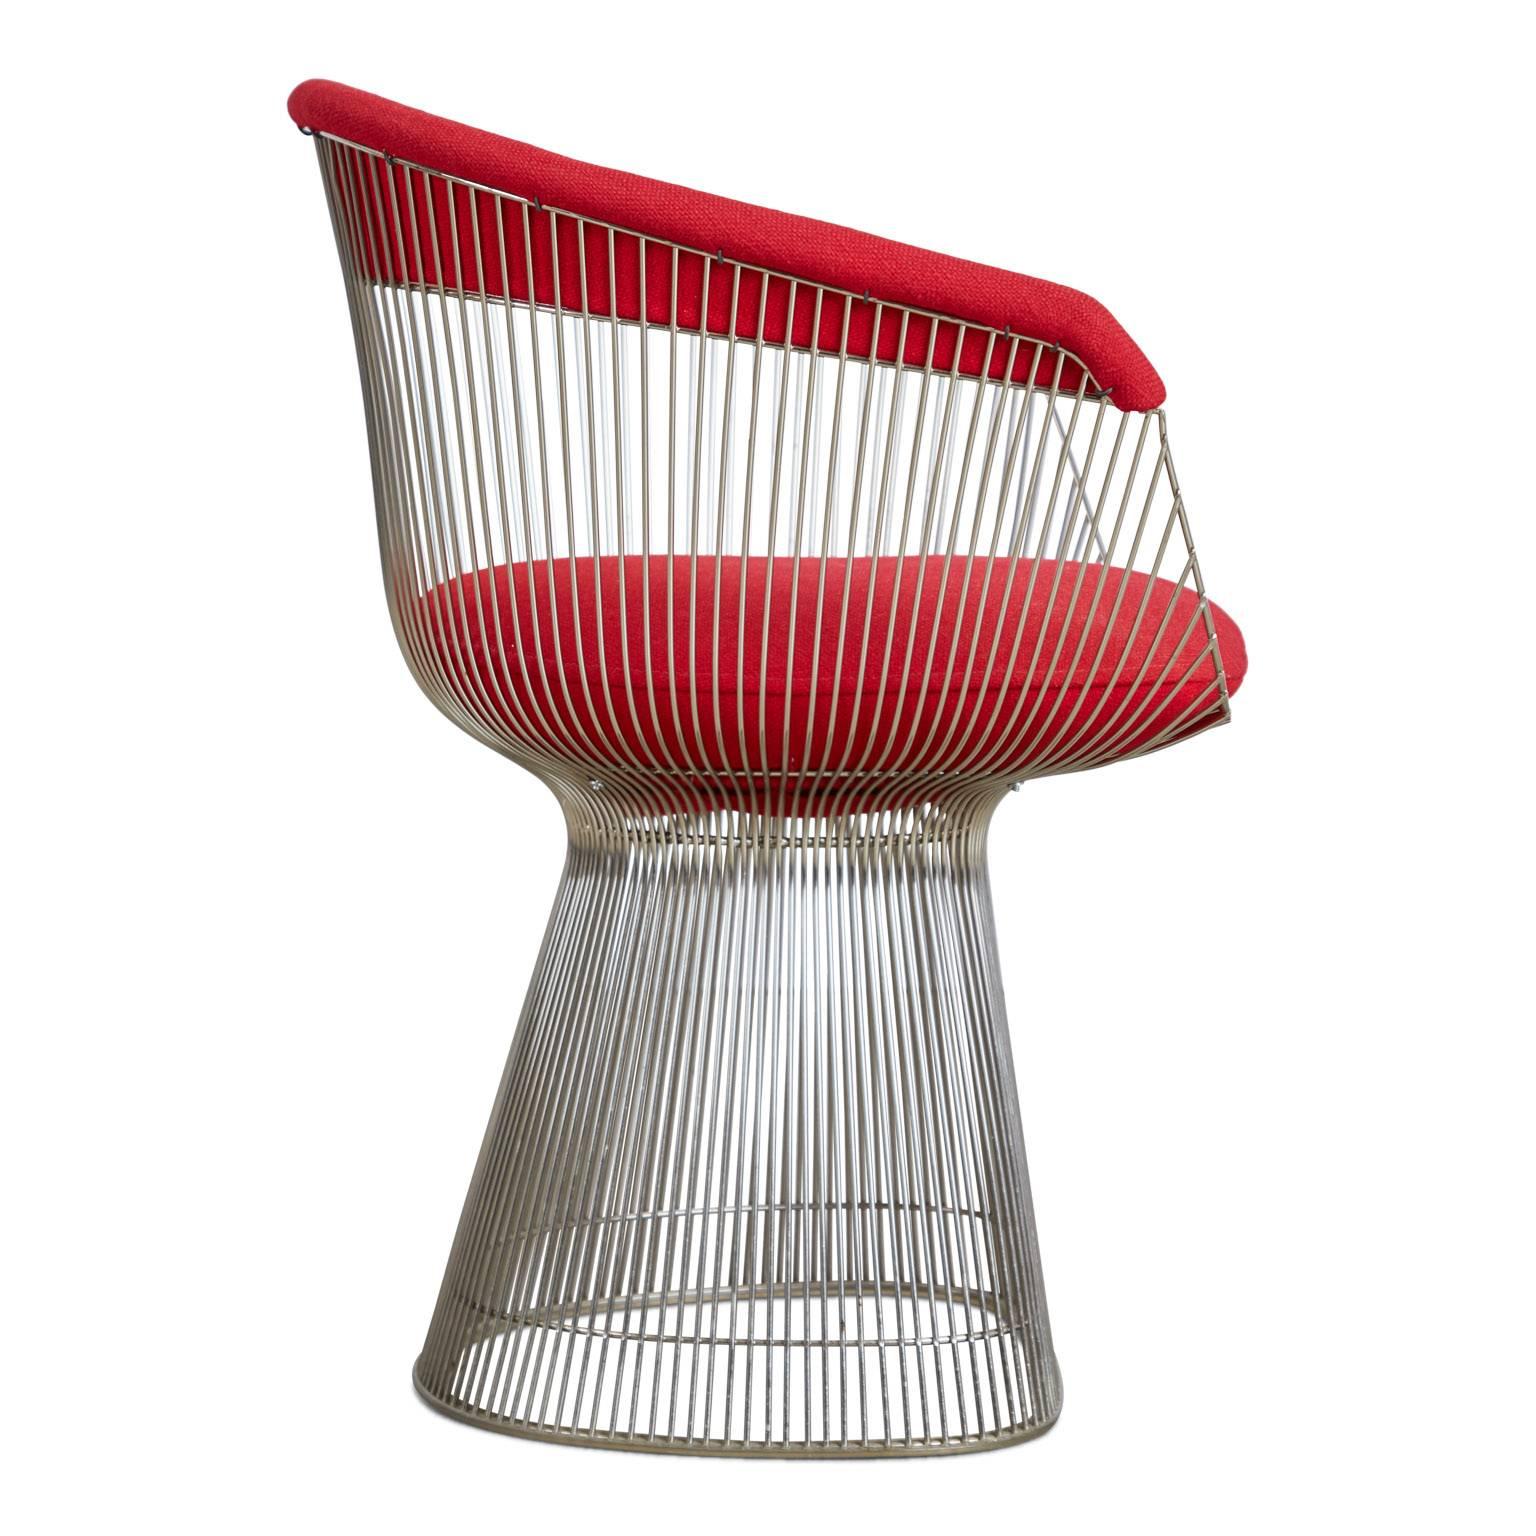 American Warren Platner Dining Armchair for Knoll International, 1981 Production Year